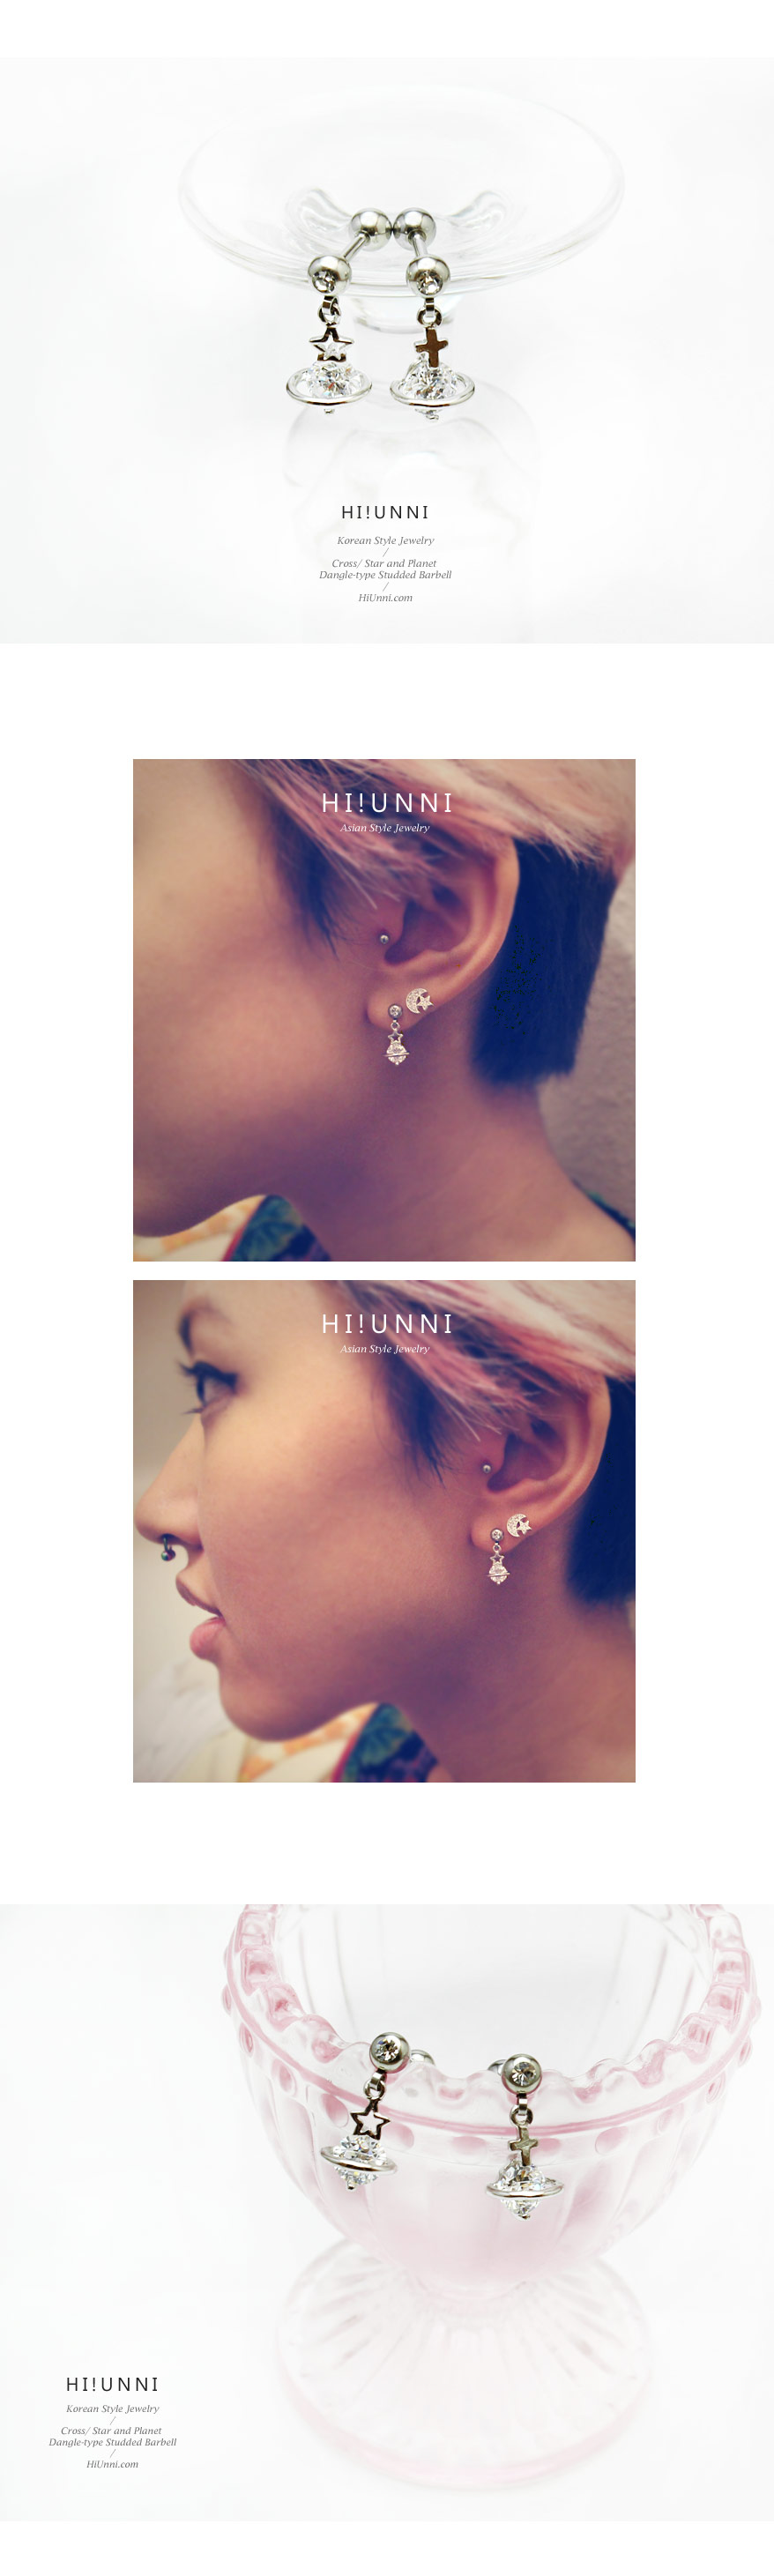 ear_studs_piercing_Cartilage_earrings_16g_316l_Surgical_Stainless_Steel_korean_asian_style_jewelry_barbell_crystal_cross_star_dangle_planet_8